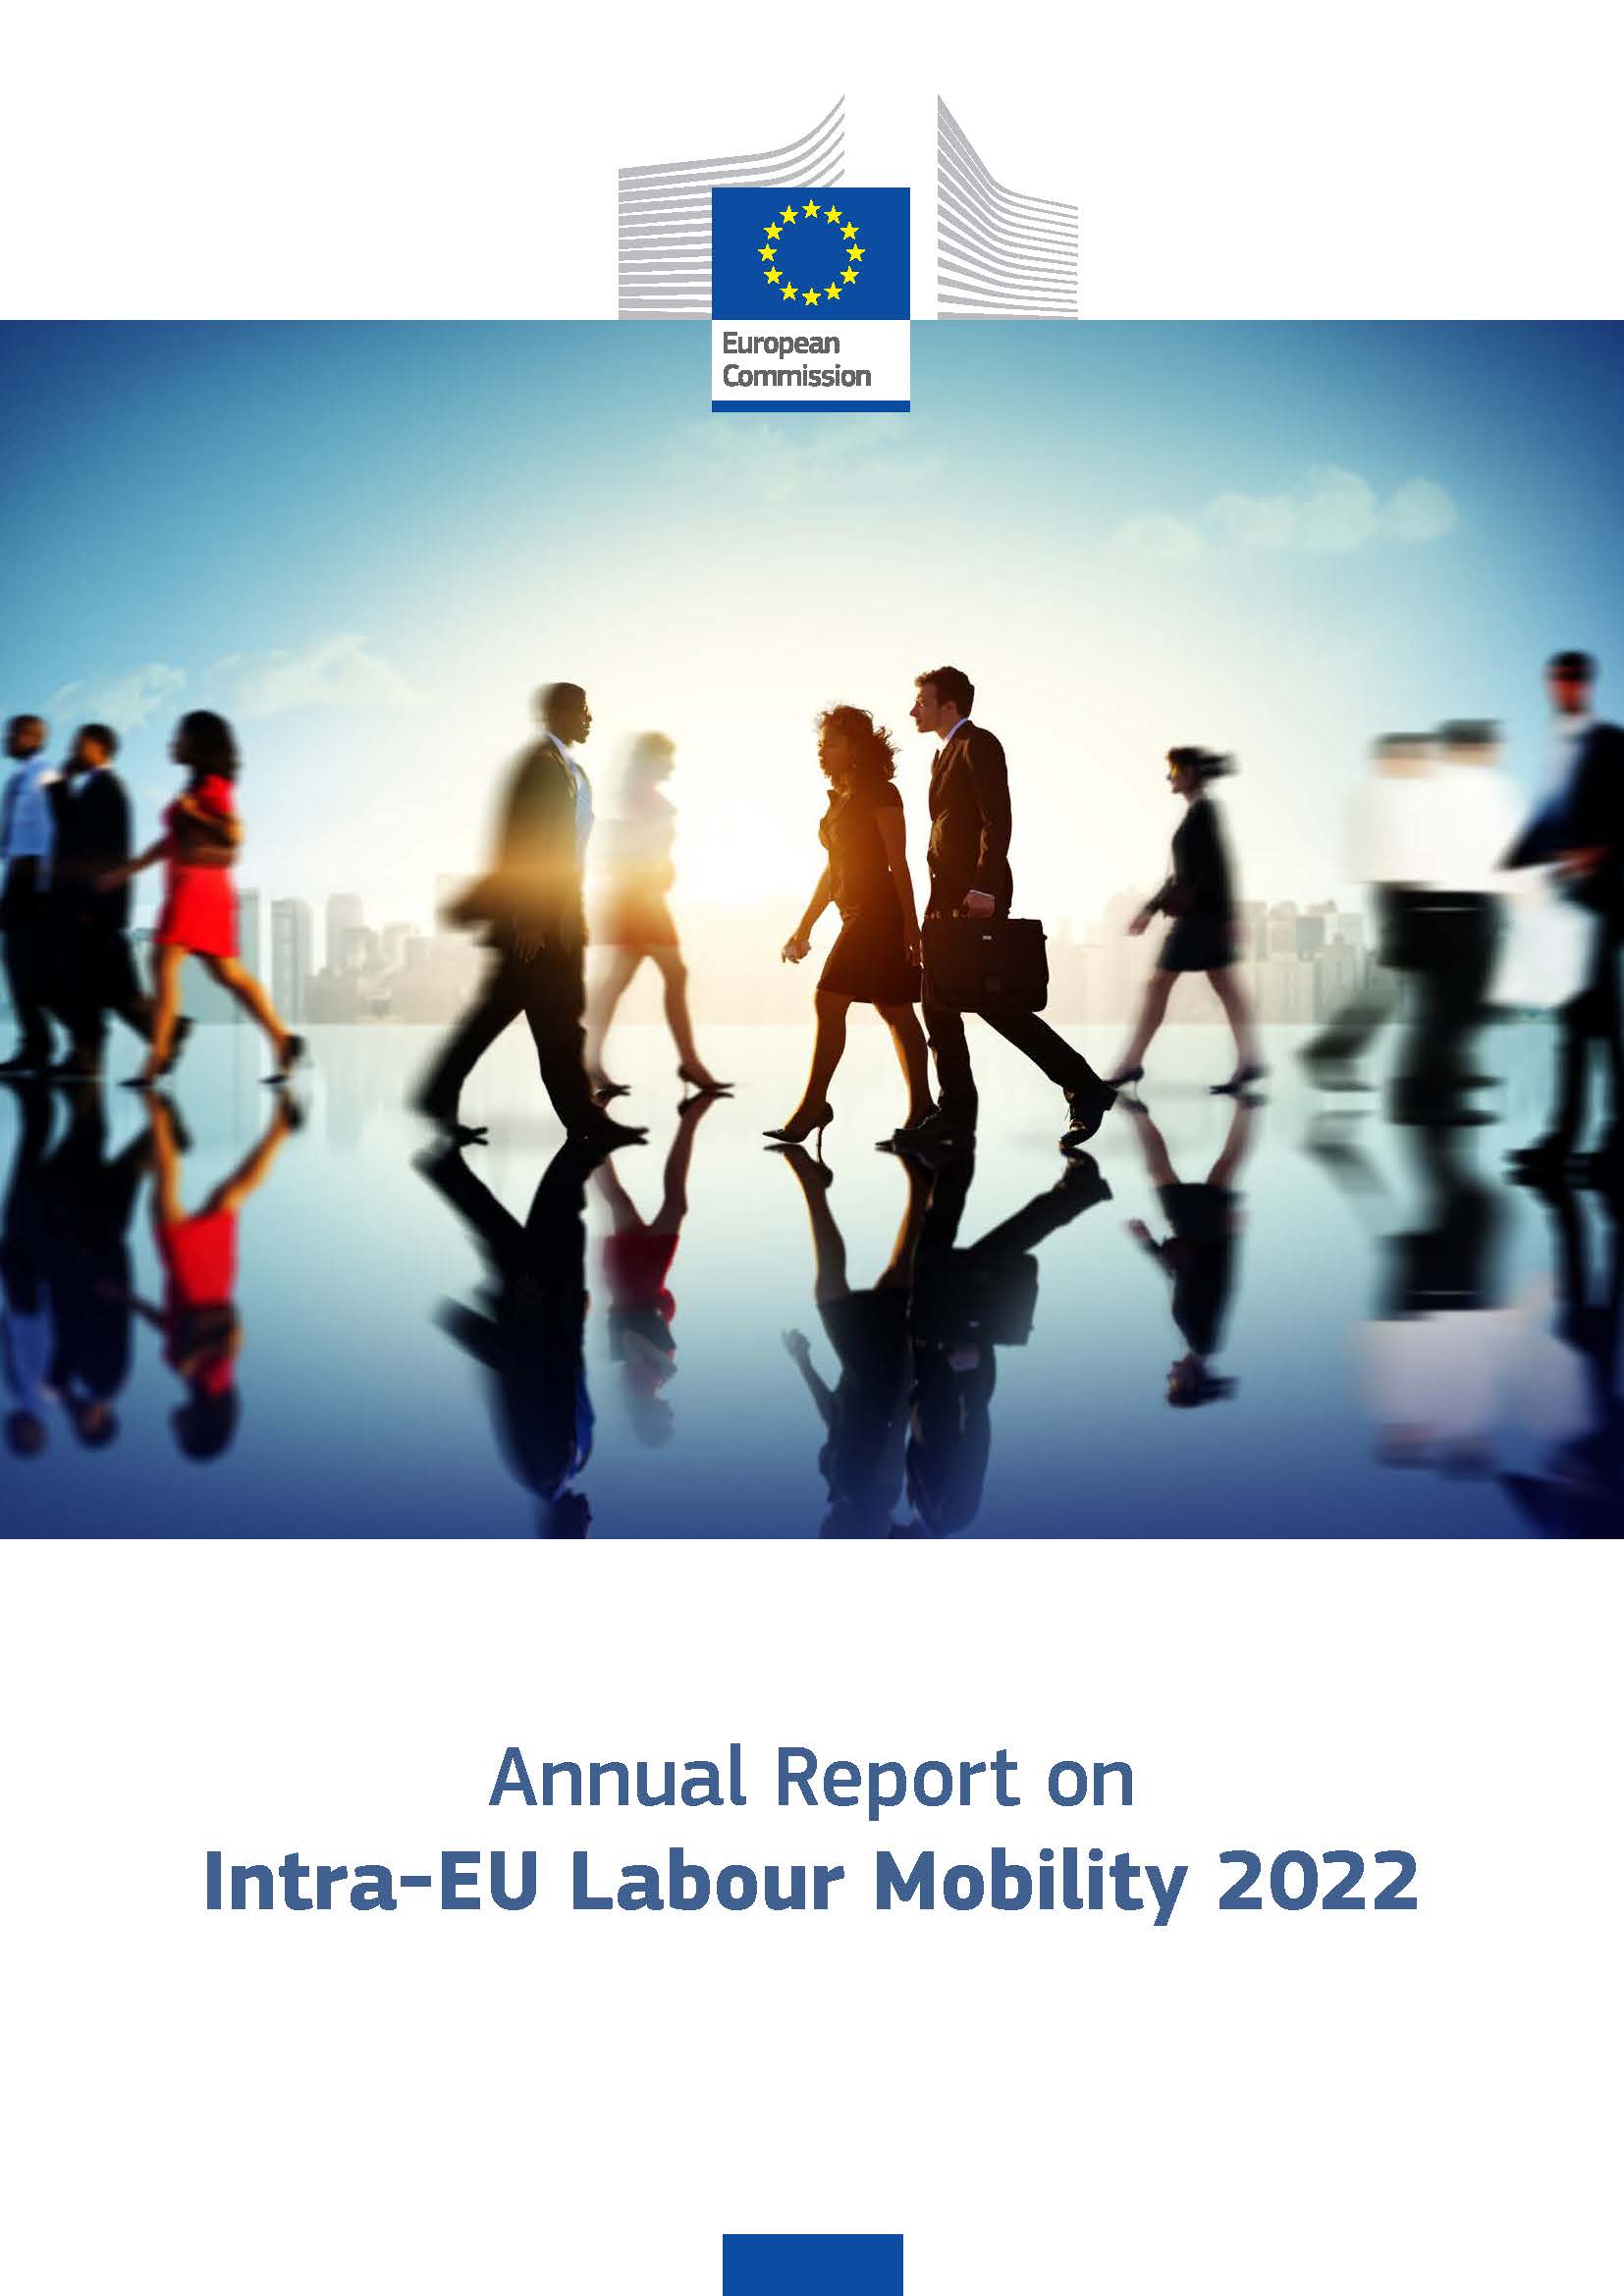 Annual Report on Intra-EU Labour Mobility 2022